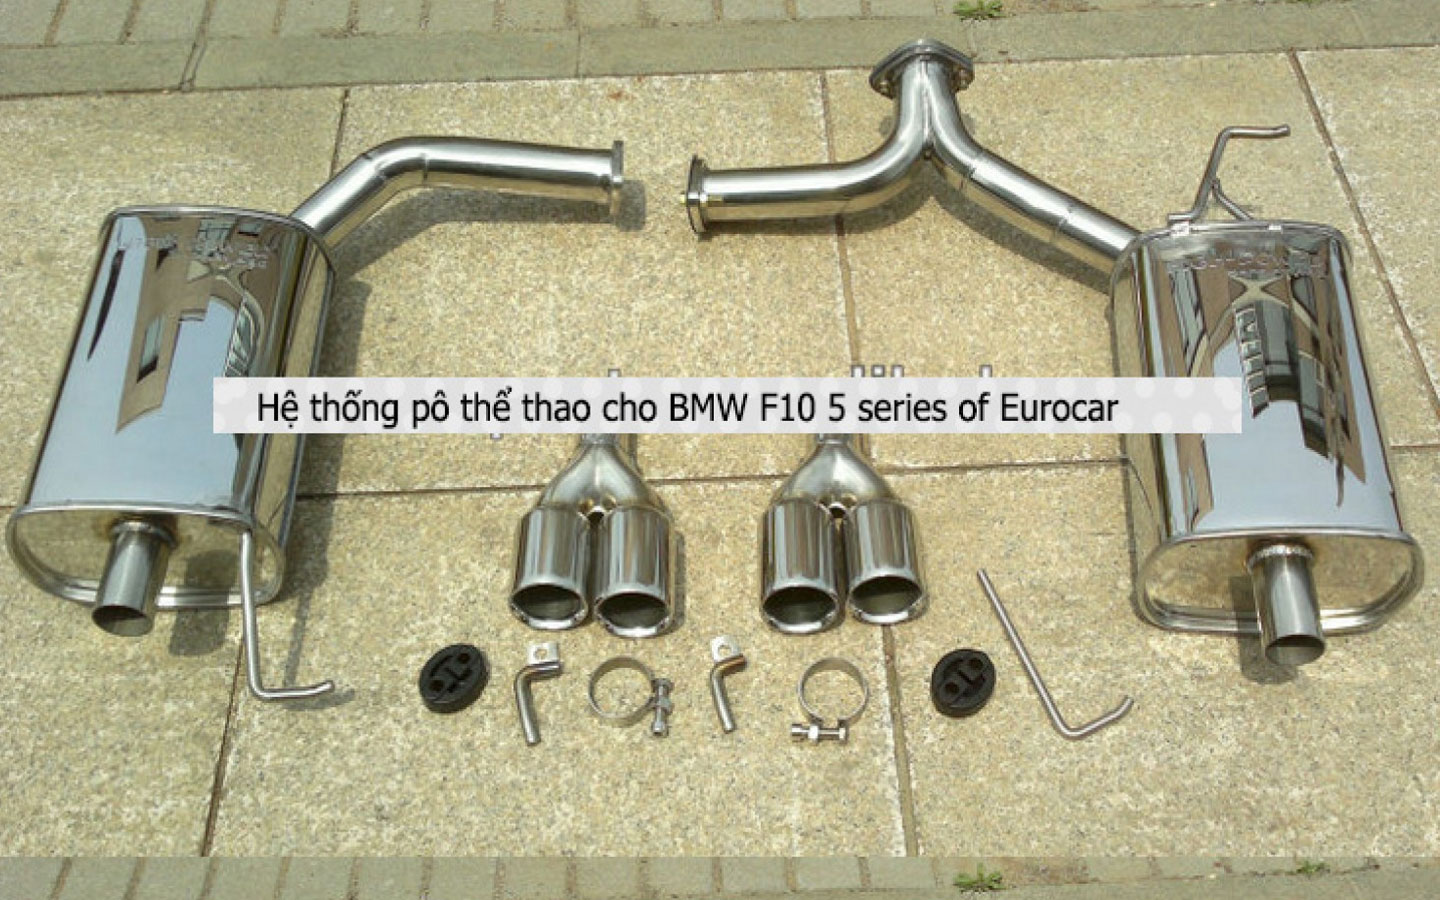 https://combo.com.vn/he-thong-po-do-the-thao-cho-bmw-f10-5-series-eurocar-small-1593829992